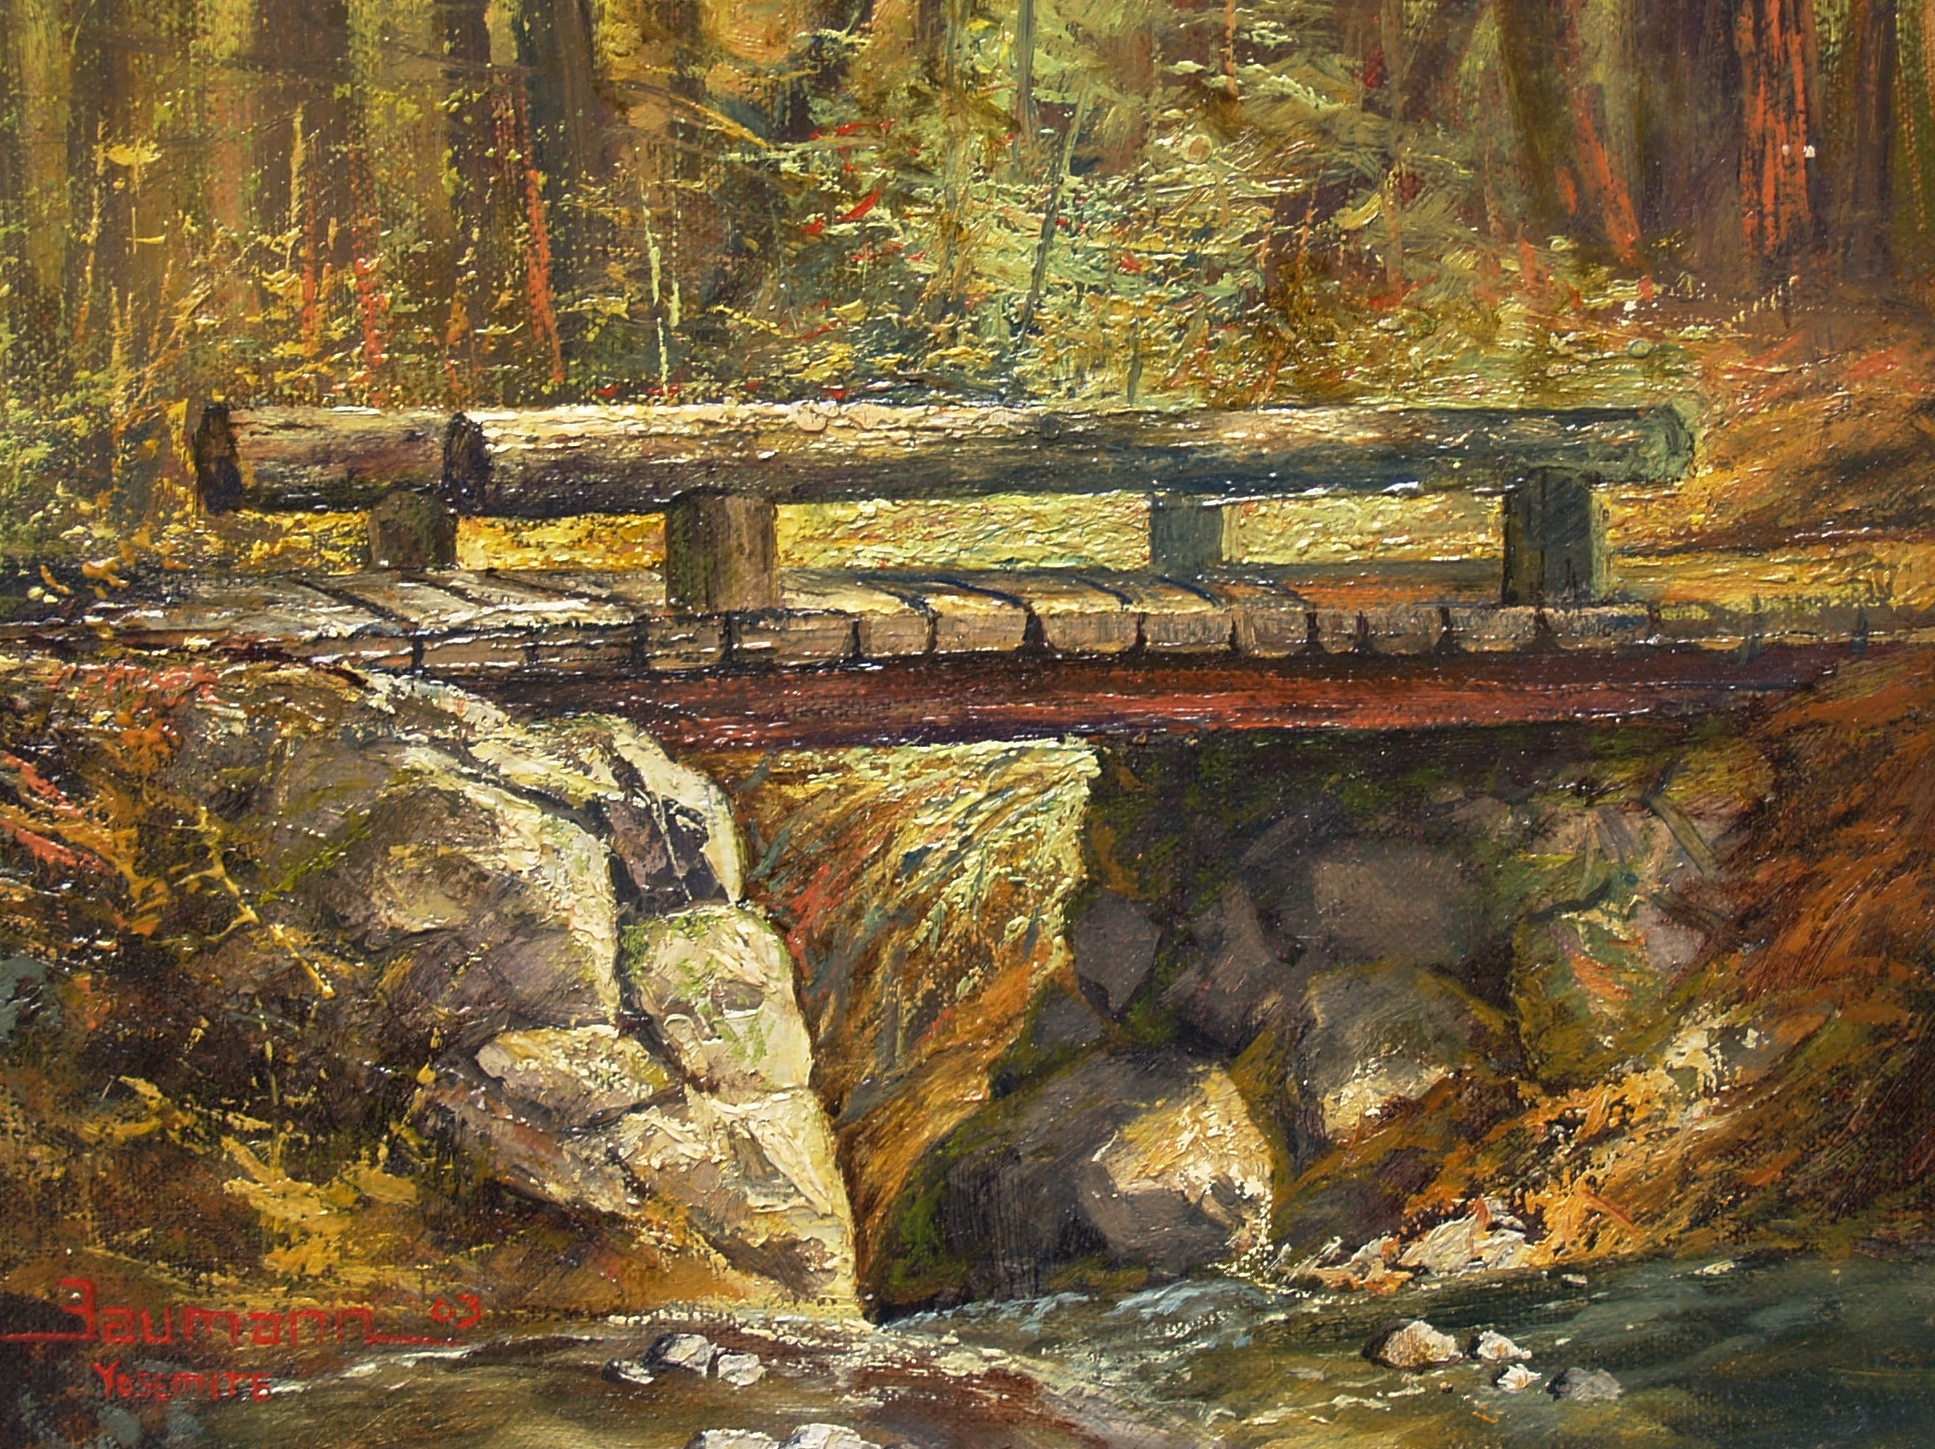 This is an oil painting called "Yosemite Foot Bridge" by Stefan Baumann that shows a wood bridge crossing a river.